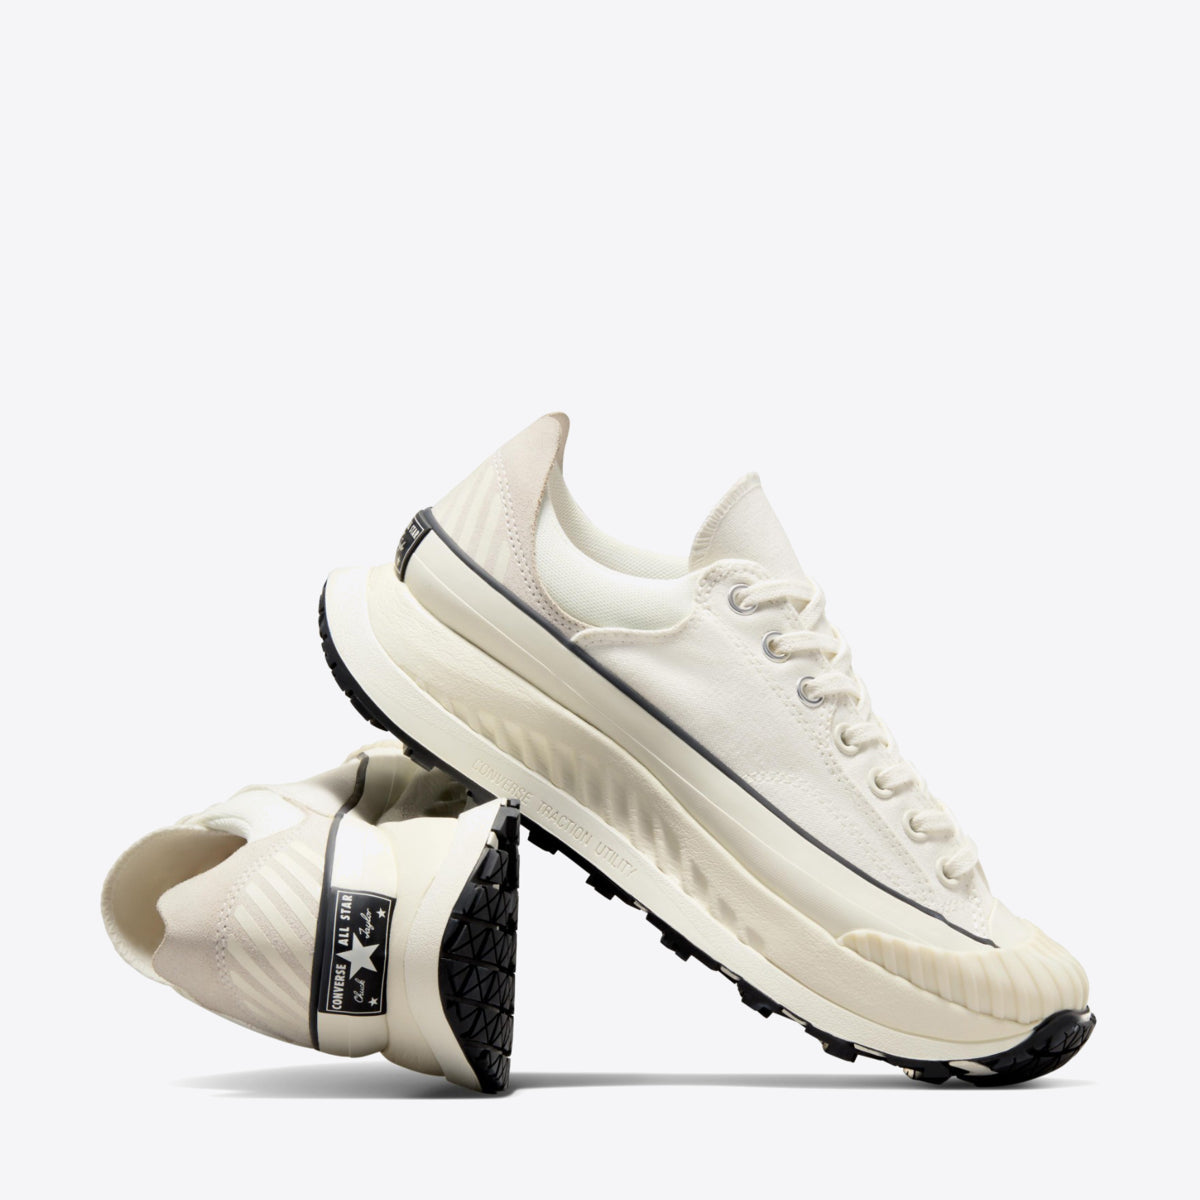 CONVERSE CT 70 AT Future Utility Low White - Image 7